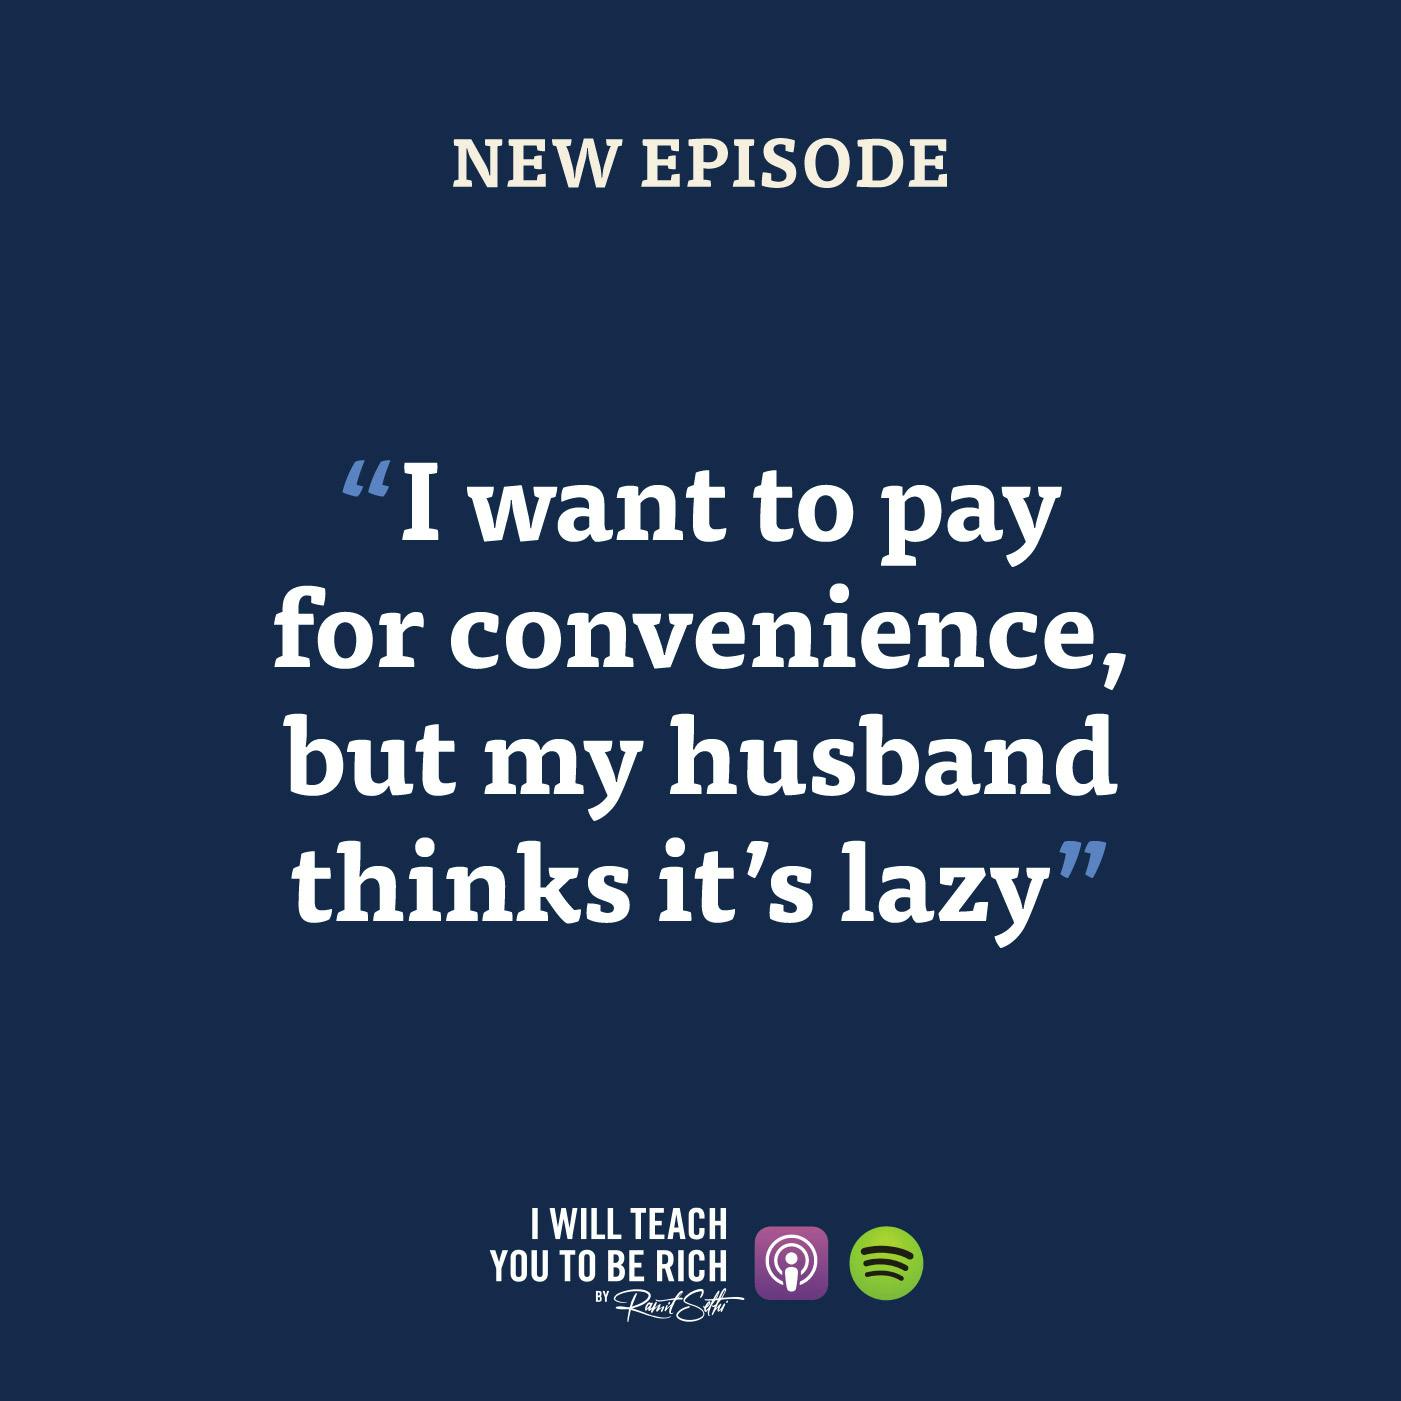 25. “I want to pay for convenience, but my husband thinks it’s lazy”